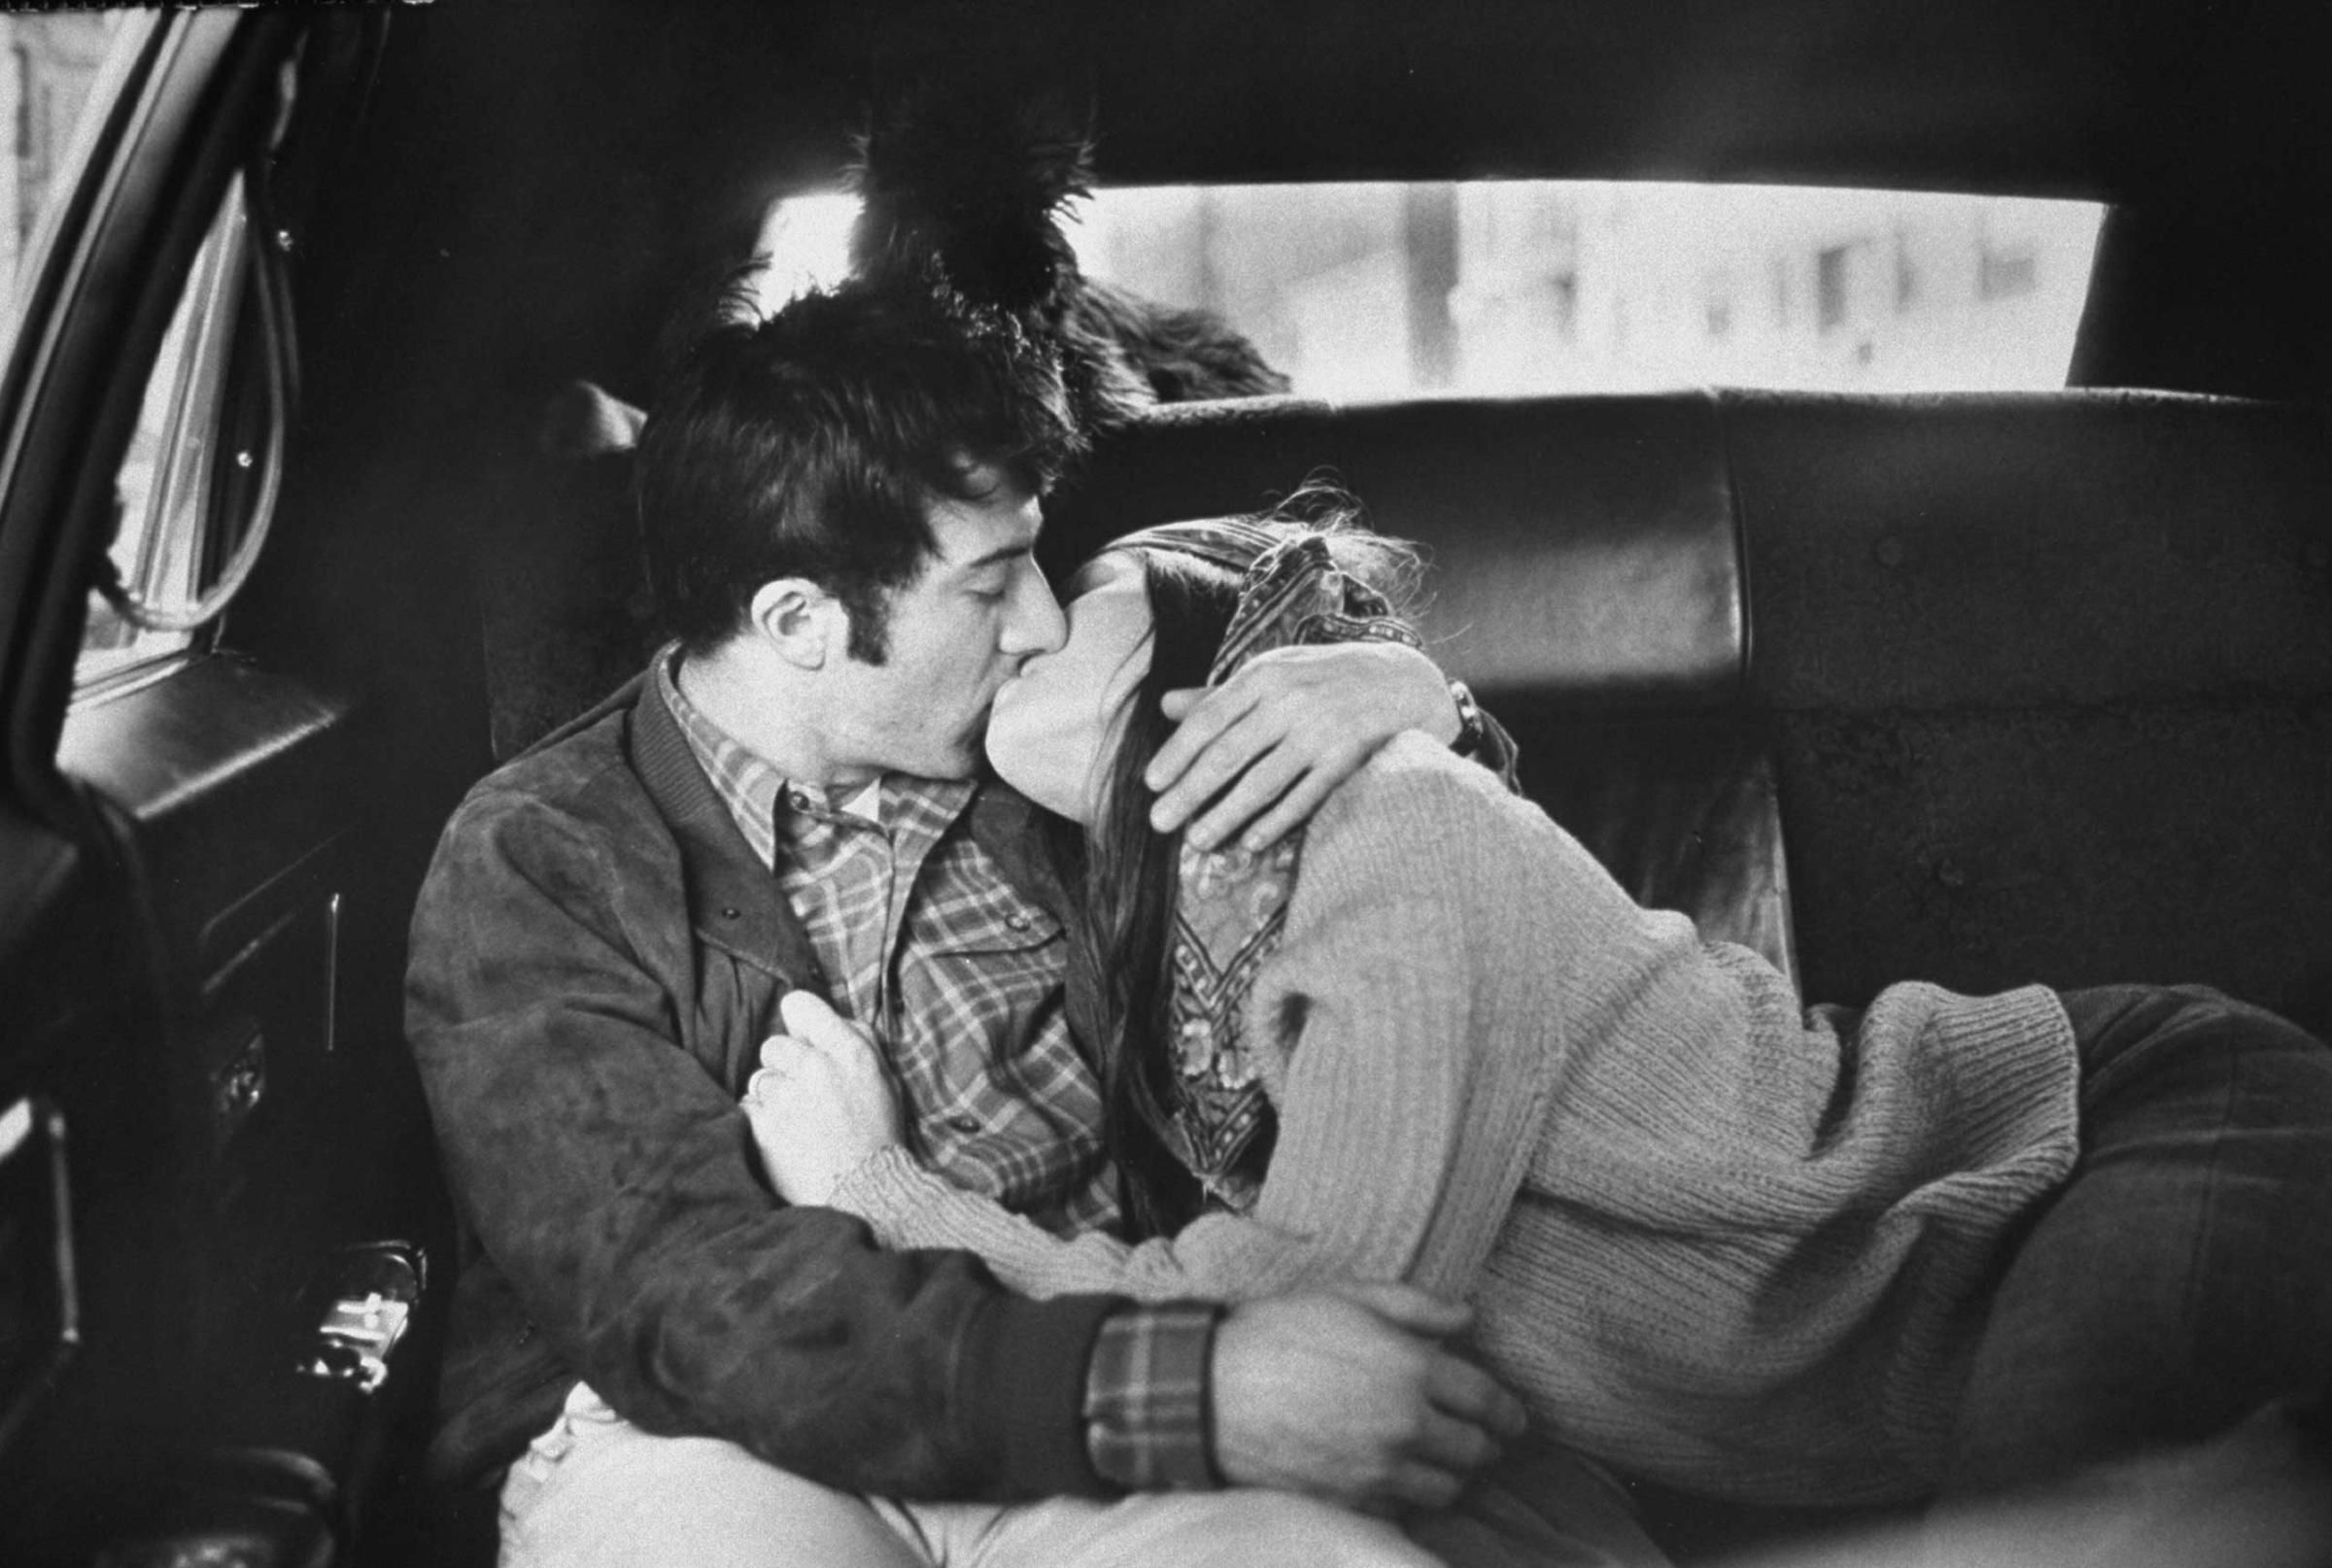 Dustin Hoffman kisses his wife, Anne Byrne, in the back of a taxi, New York, 1969.